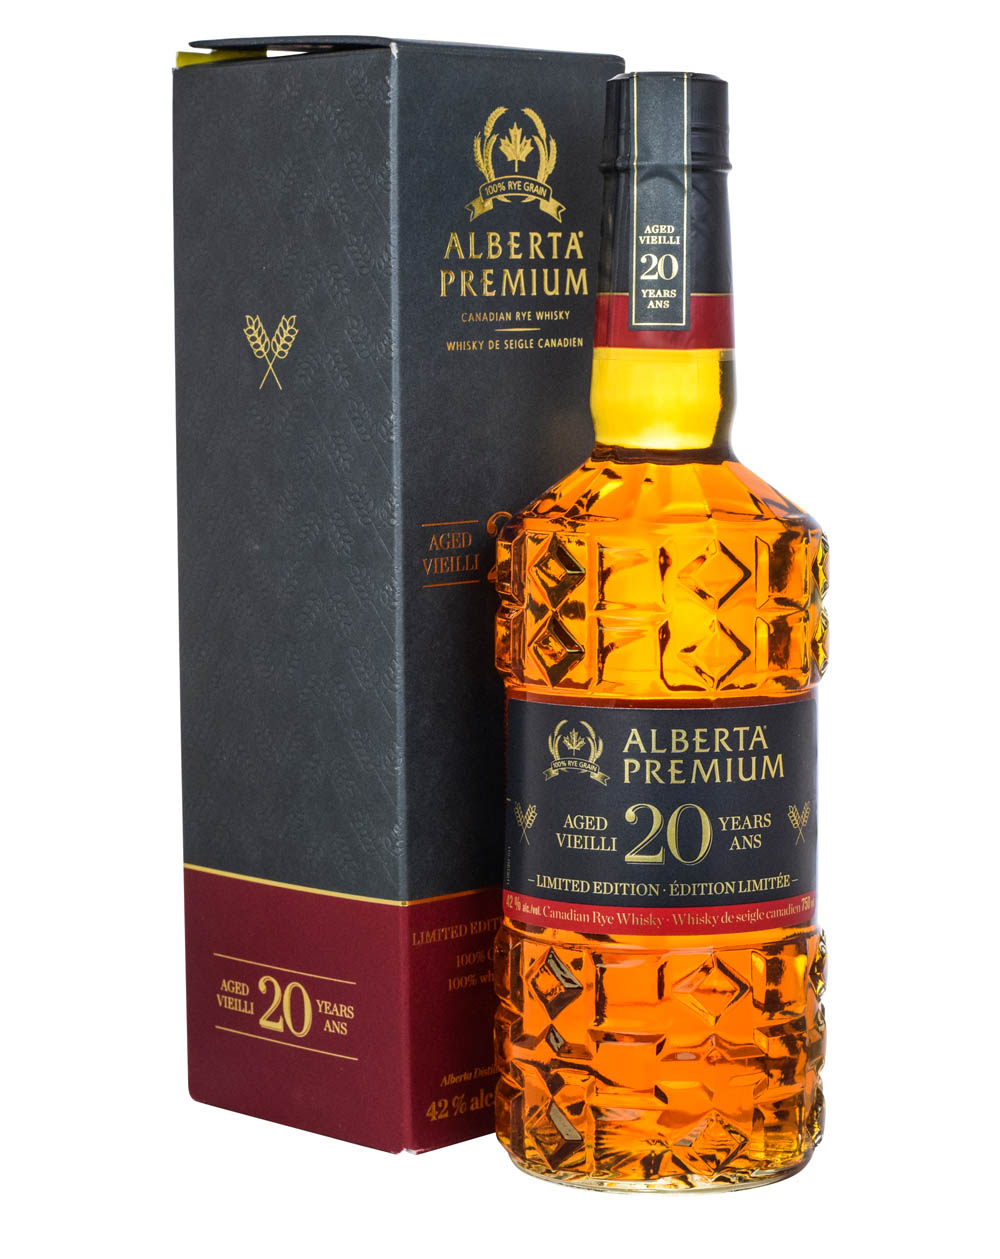 Alberta Premiun 20 Years Old Limited Edition Box Must Have Malts MHM